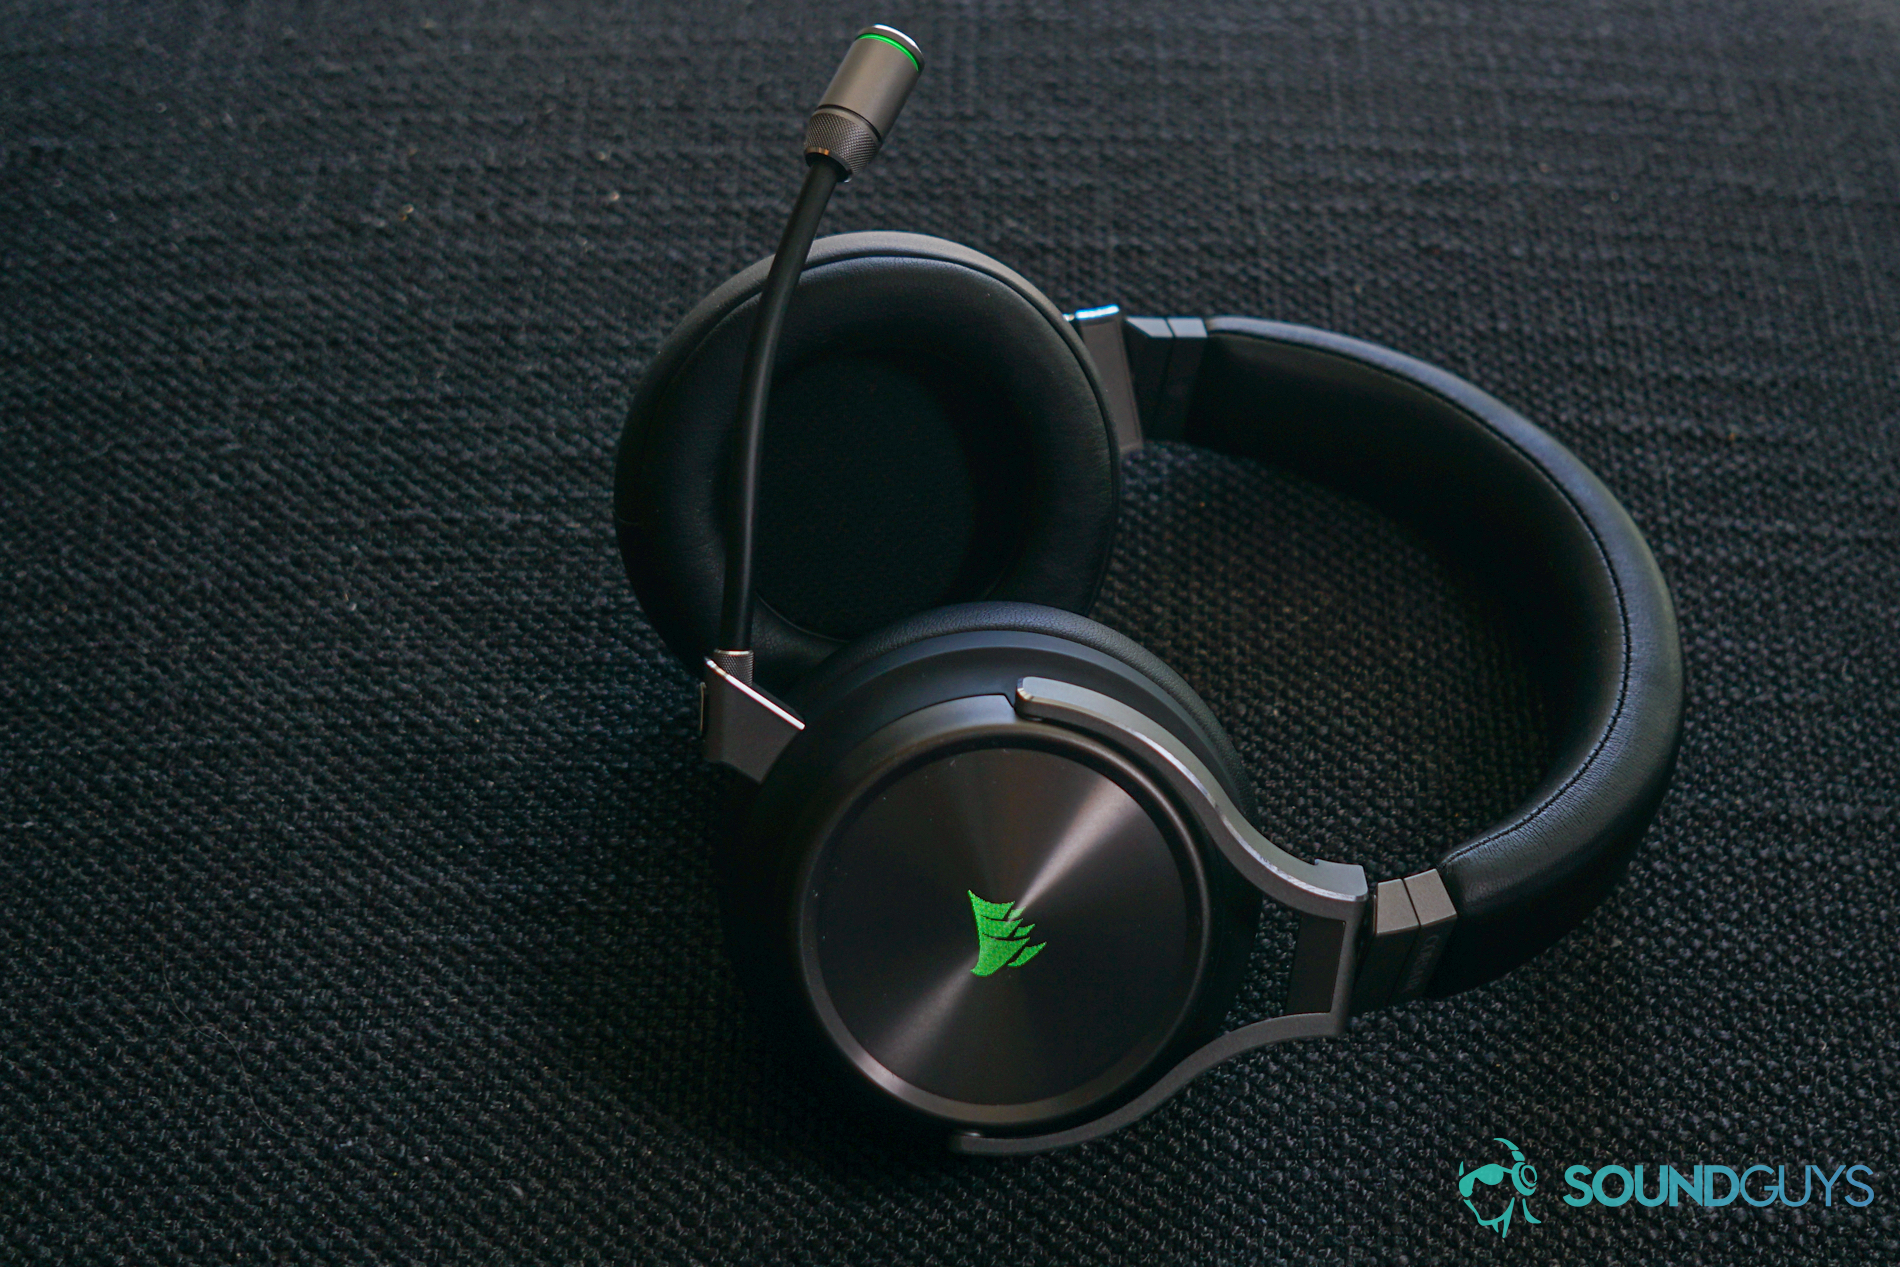 The Corsair Virtuoso Wireless SE sits on a fabric surface